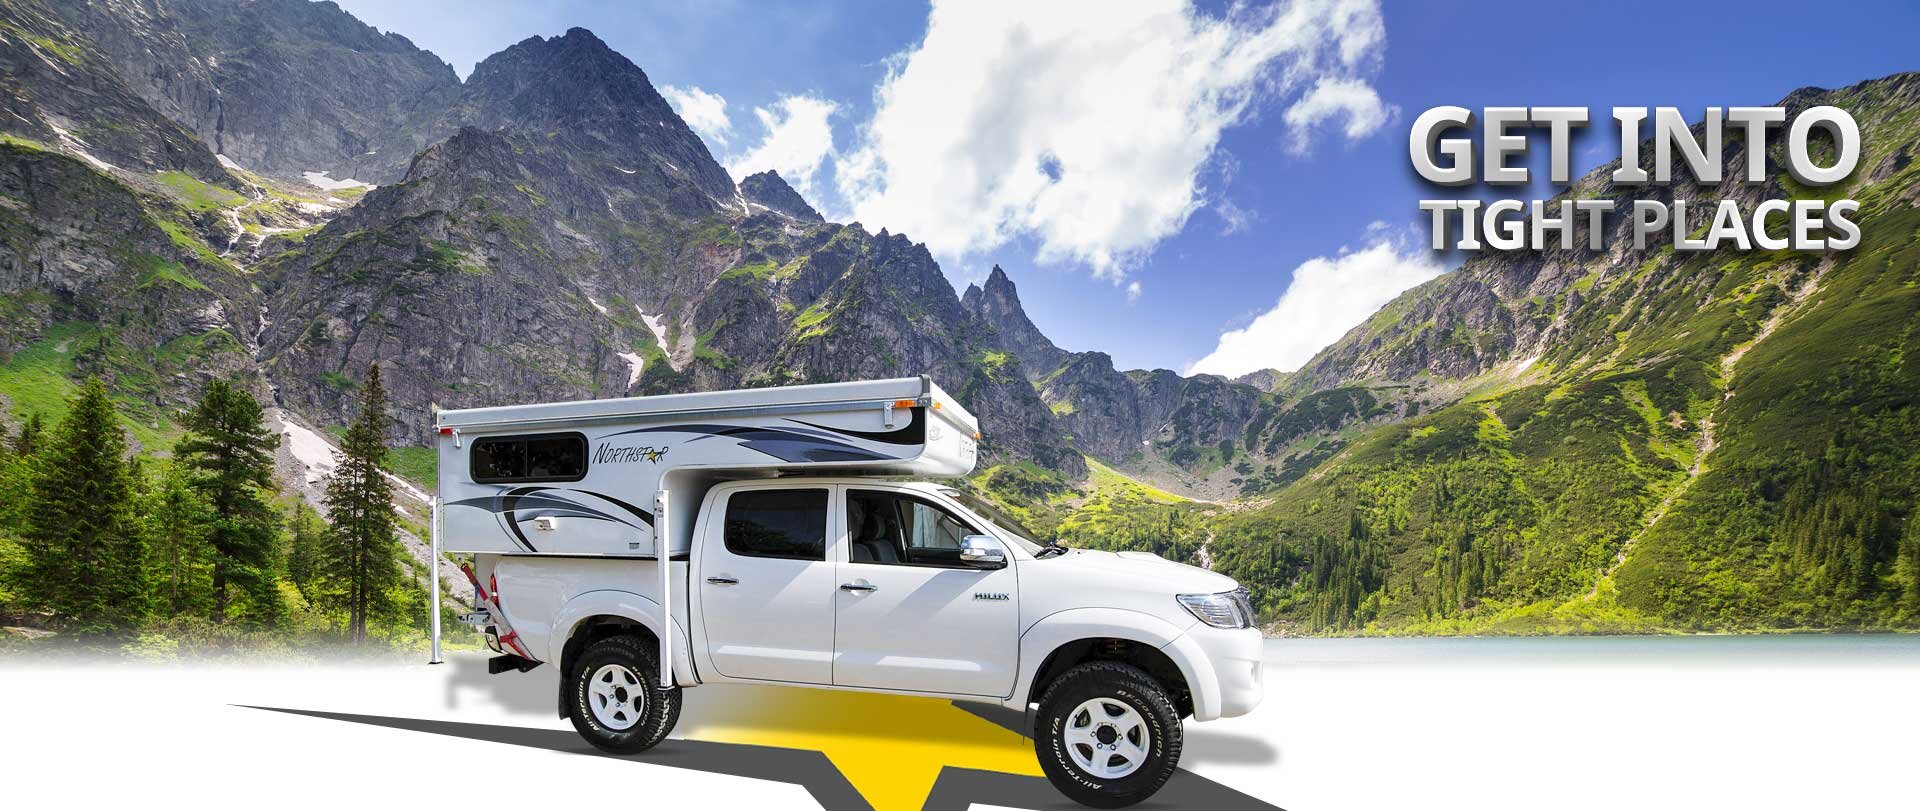 White truck with camper in front of vast mountains with Get Into Tight Places text overlayed.